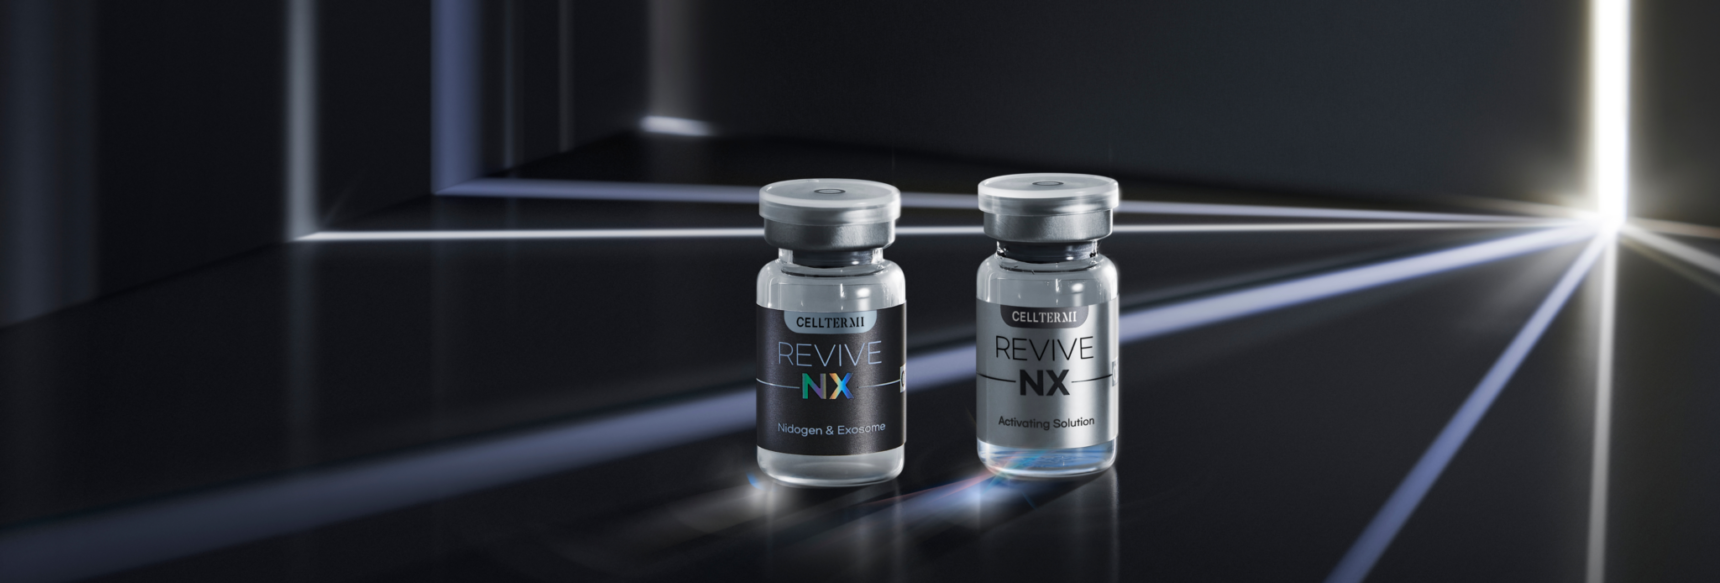 REVIVE NX Exosome